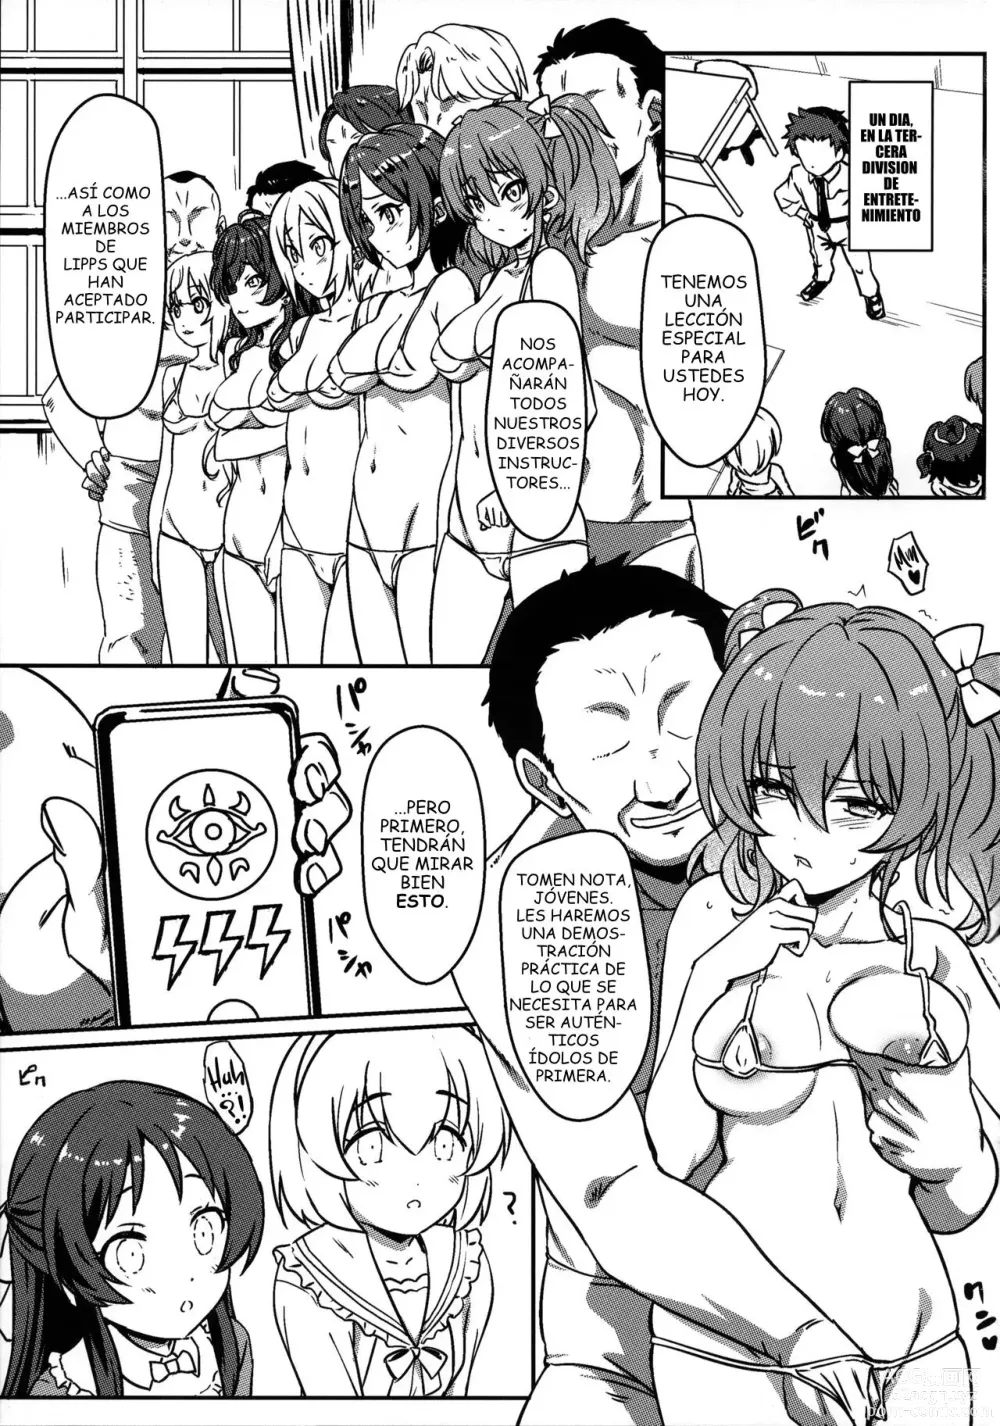 Page 2 of doujinshi Third Entertainment Division's Hypnosis Lessons